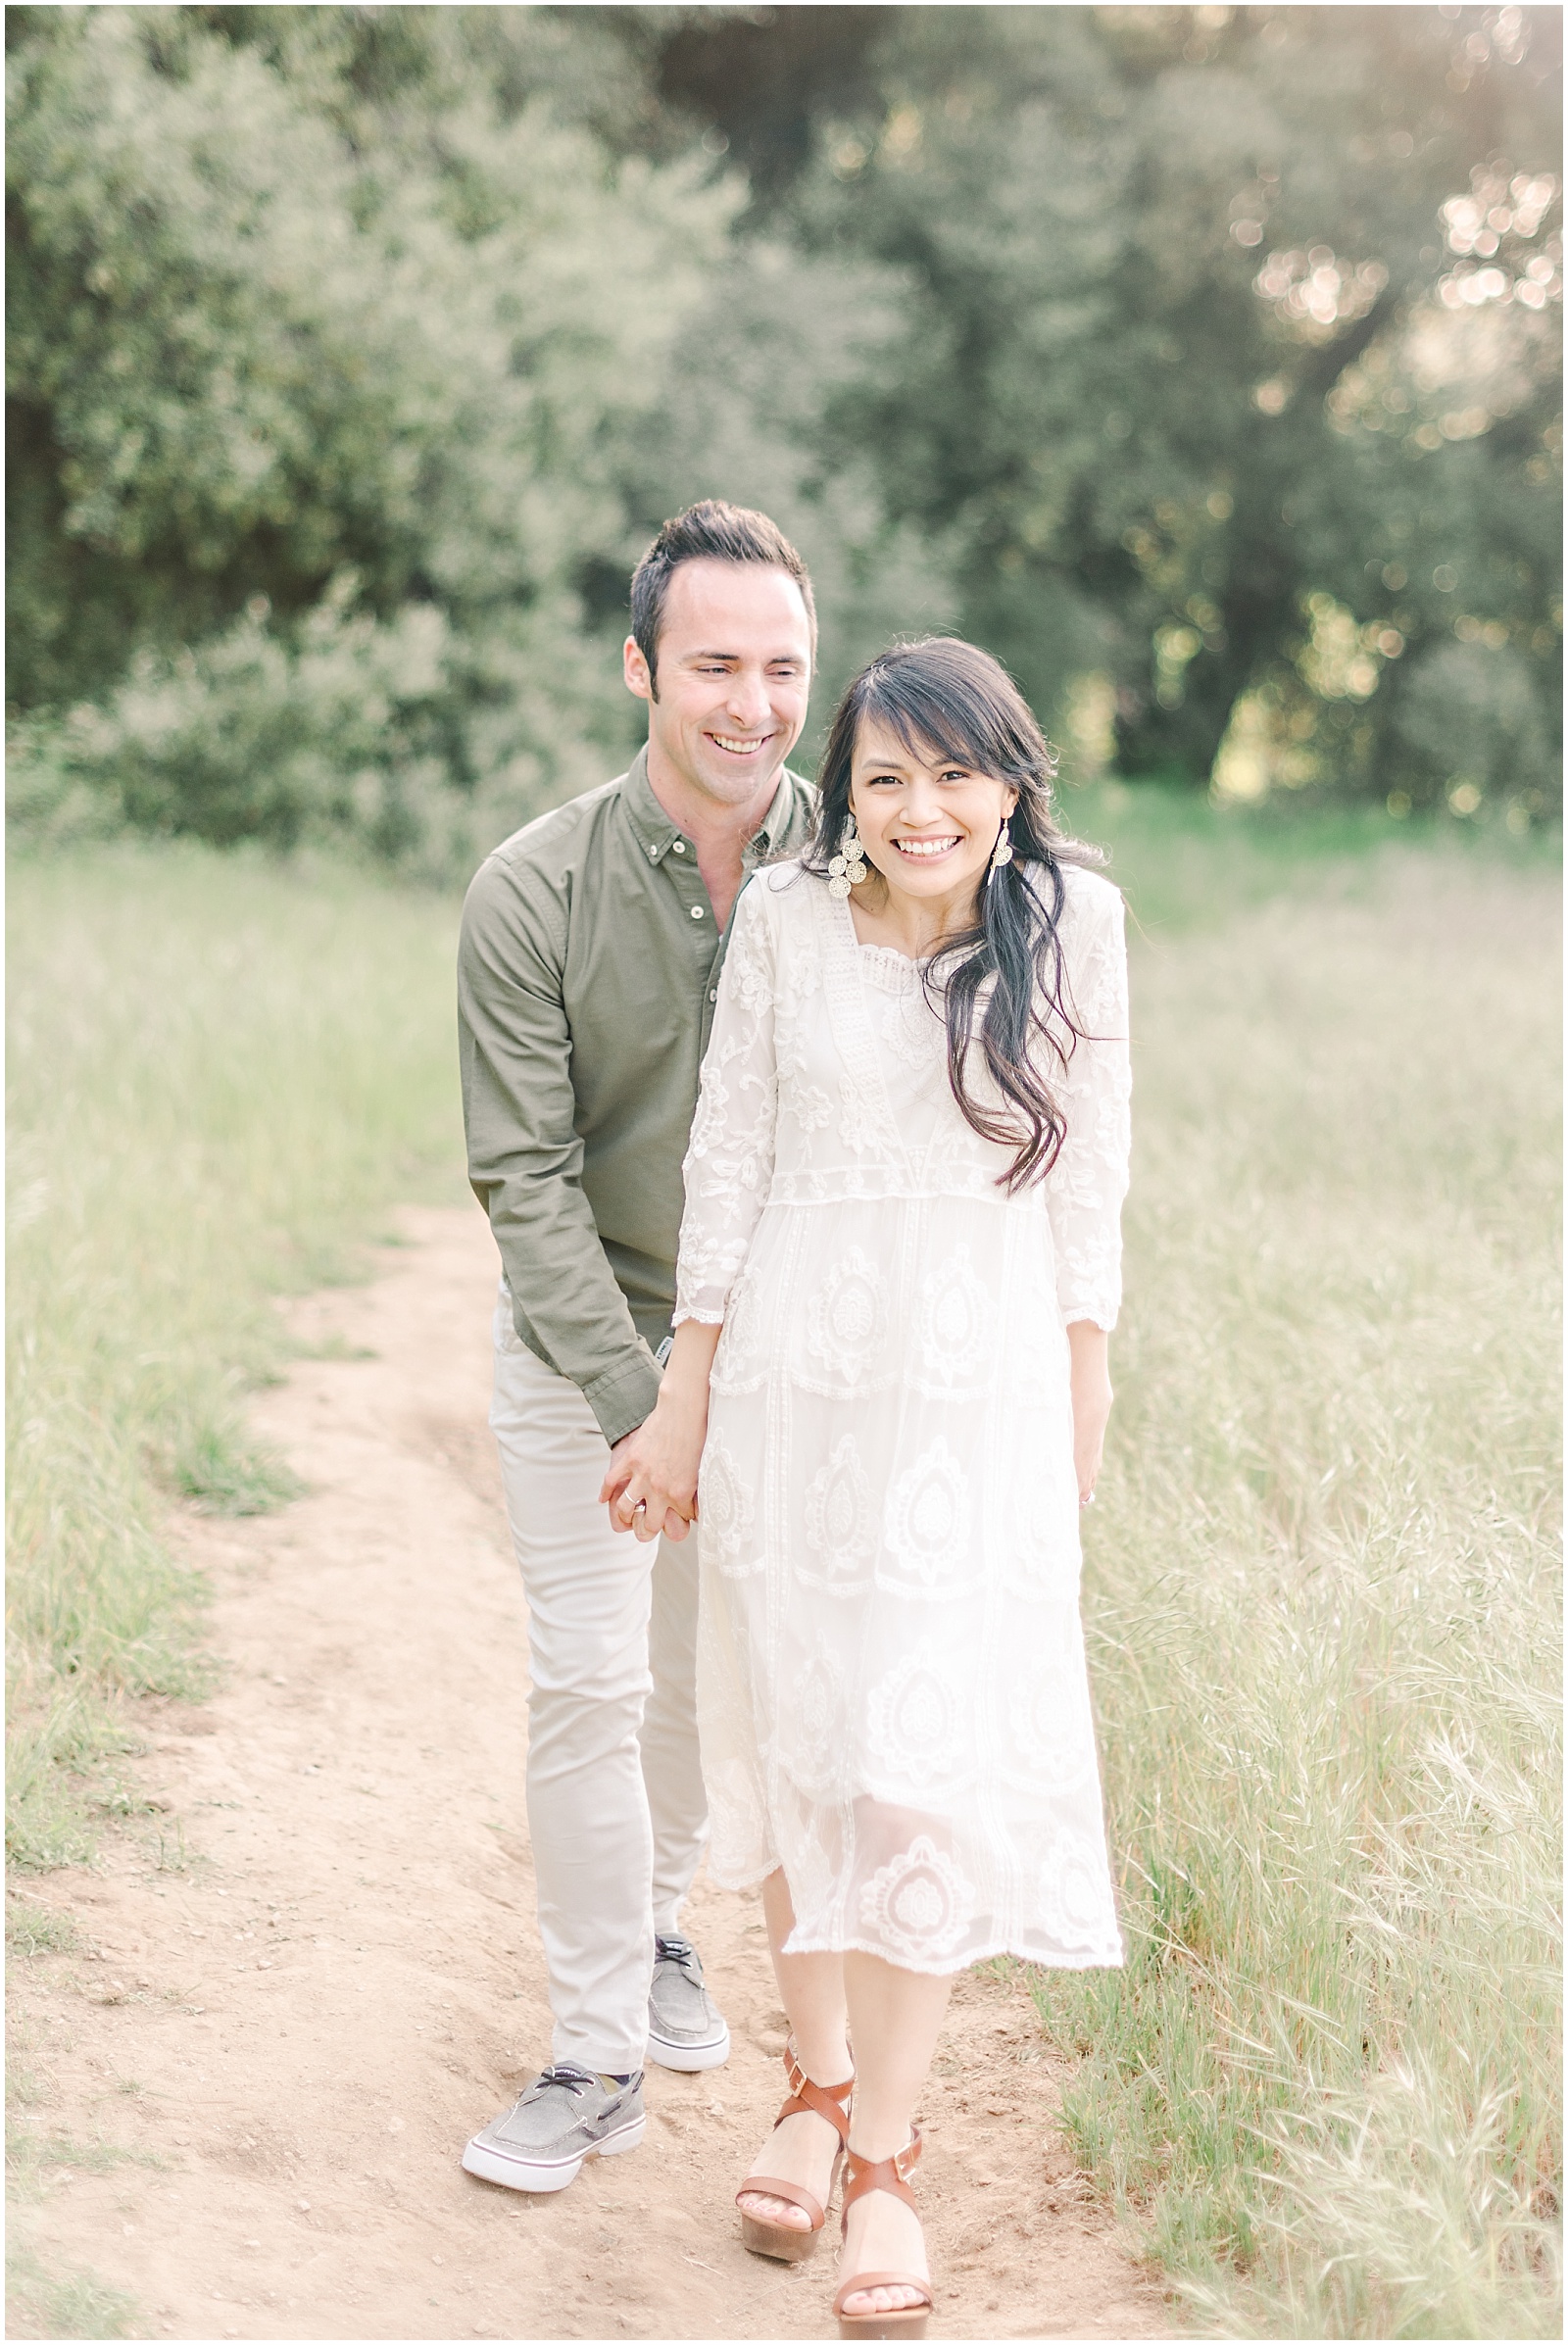 Wildwood Canyon Regional Park Engagement Session in Yucaipa by Mollie Jane Photography. To see more go to www.molliejanephotography.com